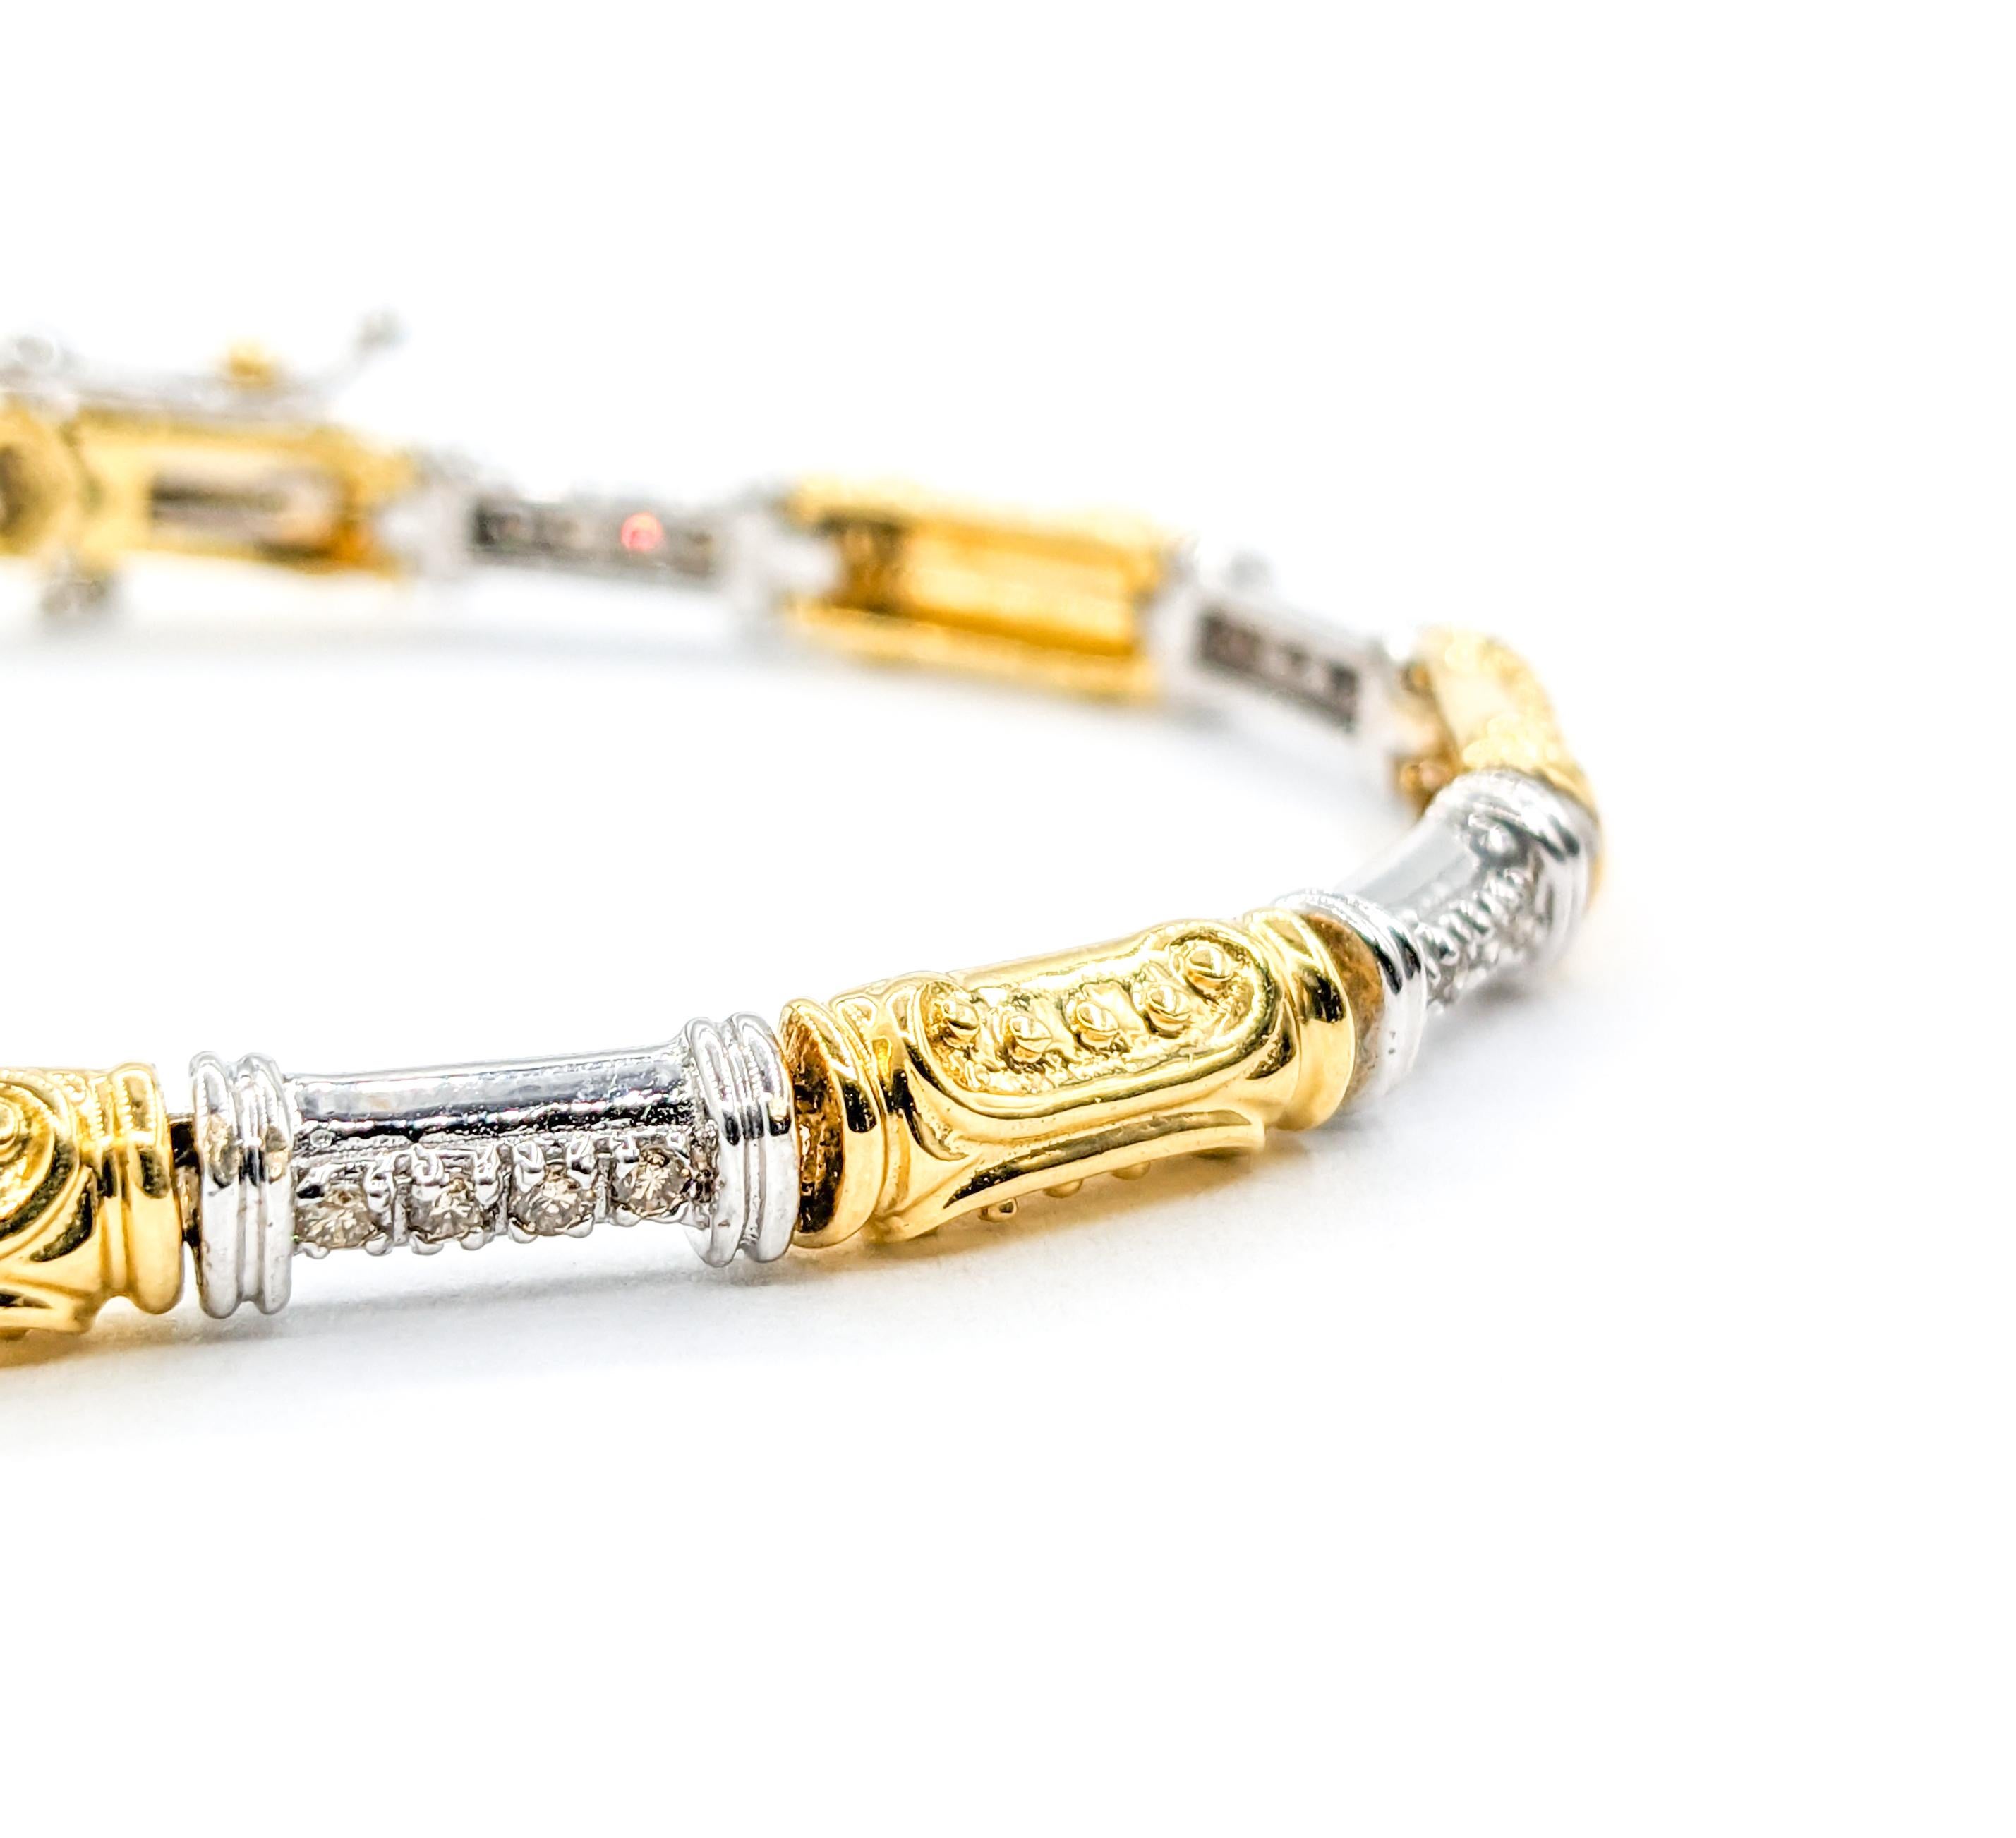 Stunning Diamond Bracelet In Two-Tone Gold

Introducing a stunning bracelet, expertly crafted in 18 karat two-tone gold. It features a dazzling array of diamonds, totaling .52 carats, each with an I1 clarity and I-J color, creating a radiant